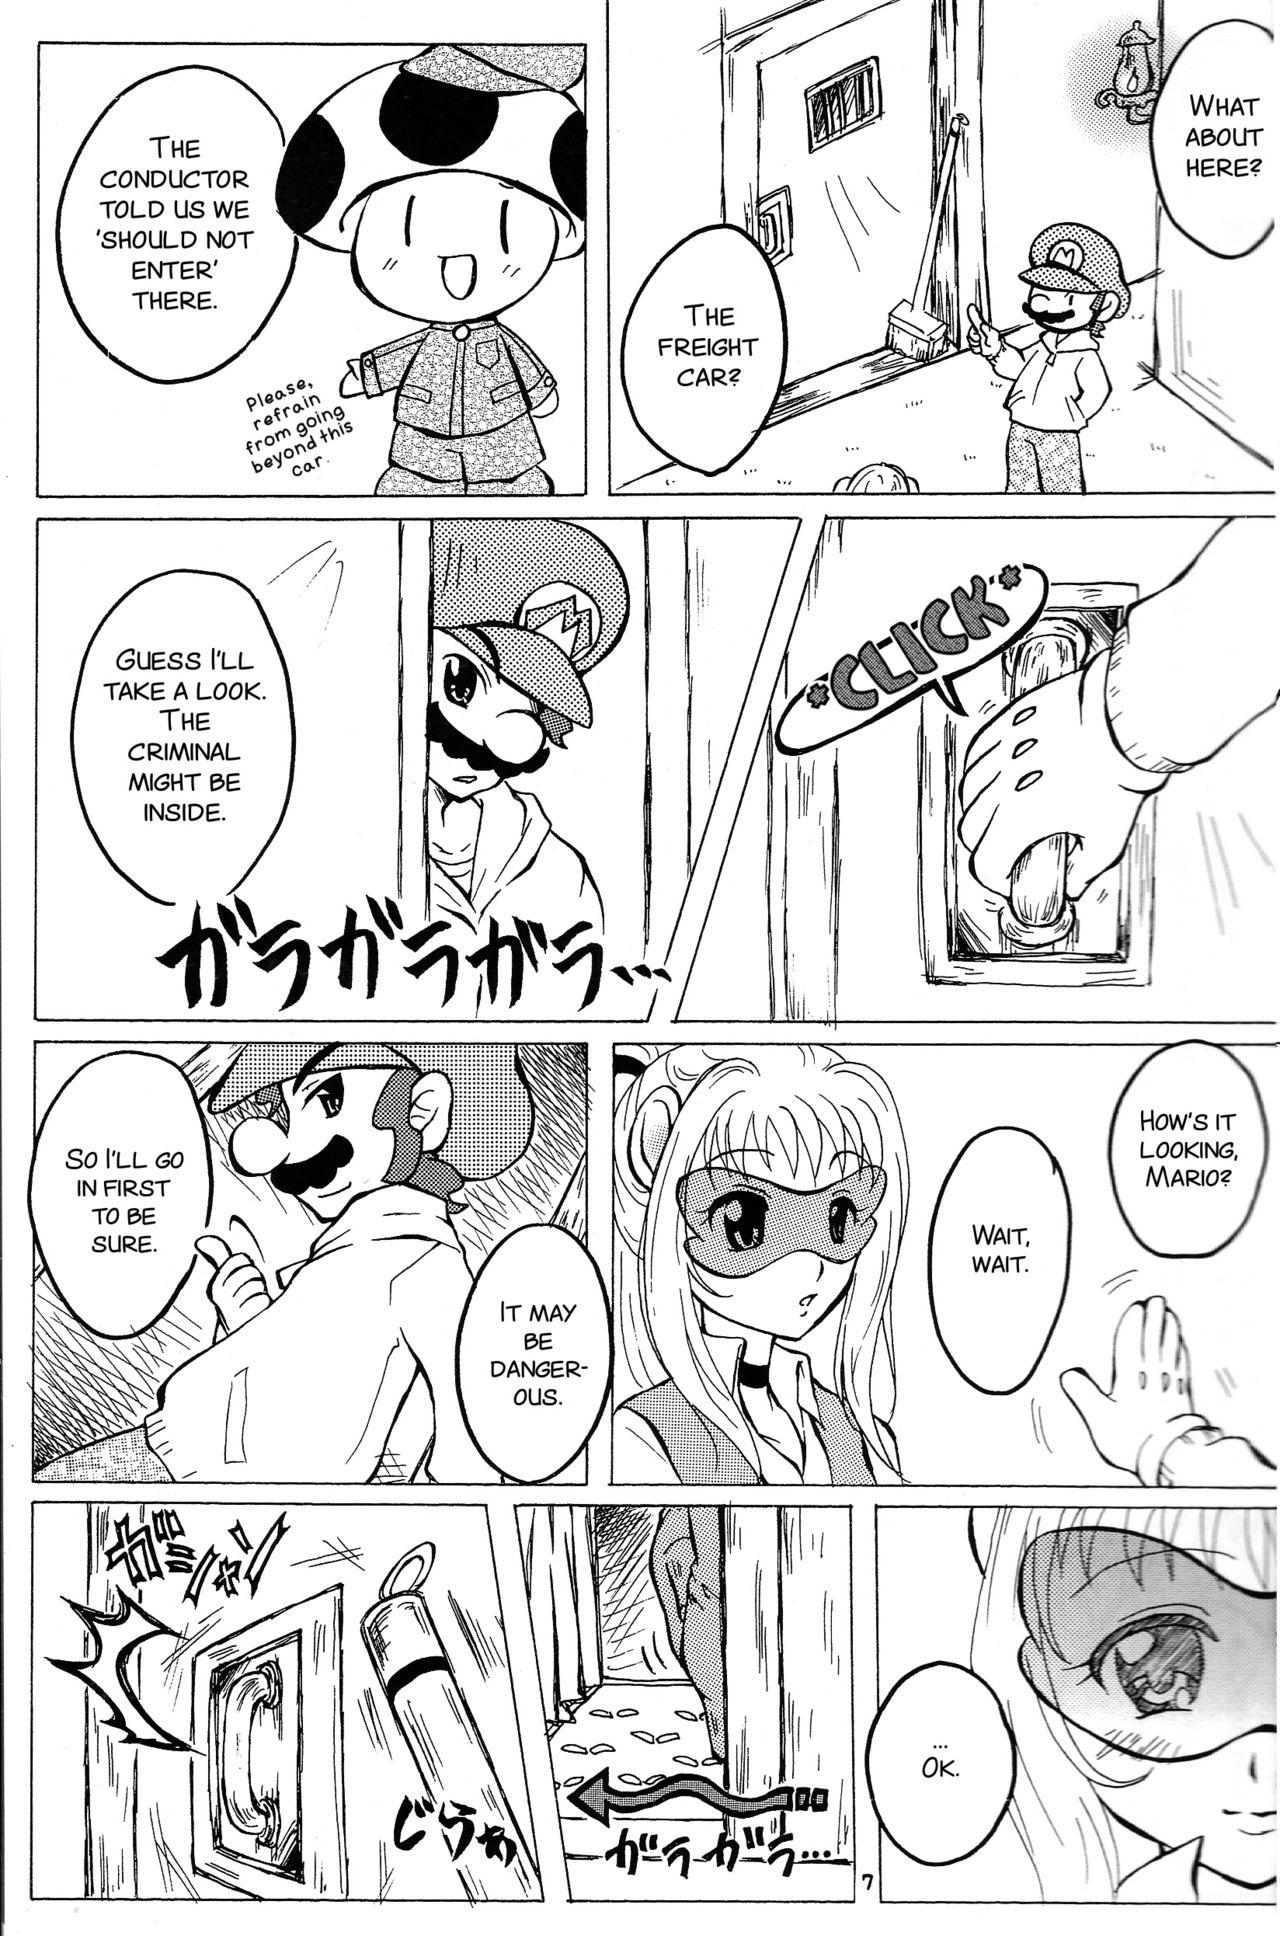 Style Machuchu 10 - Super mario brothers Busty - Page 9